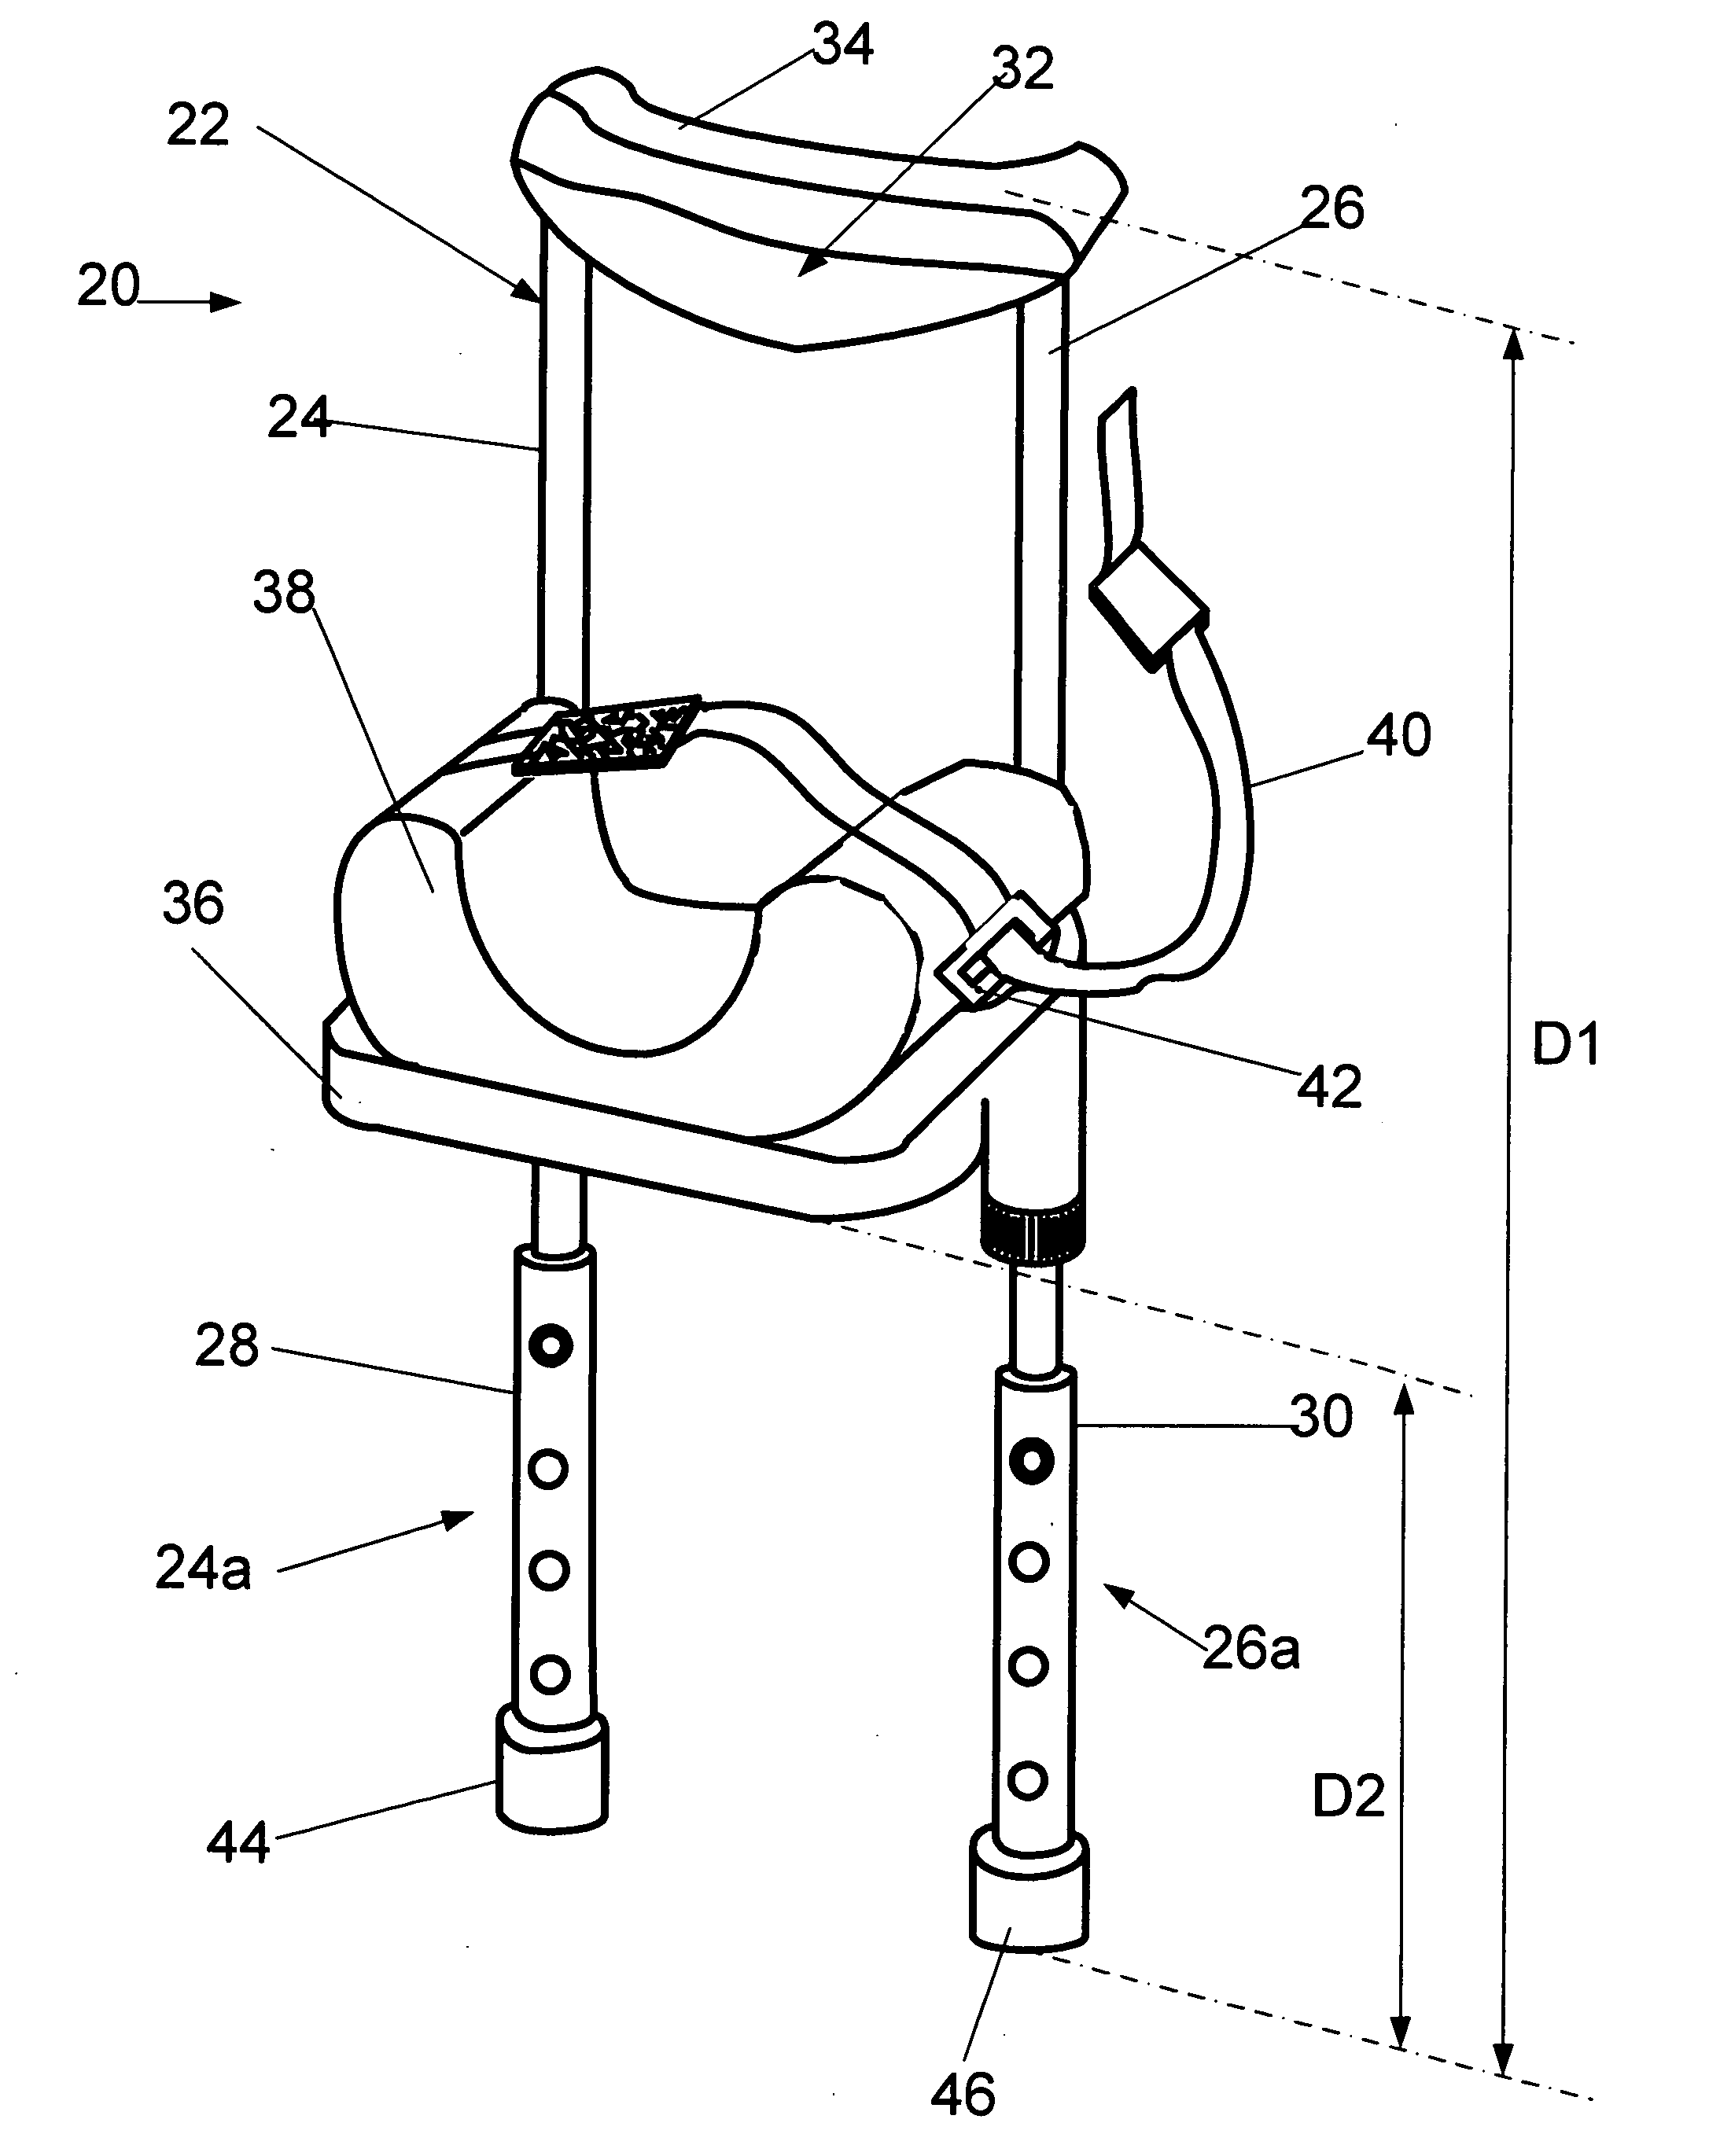 Mobility assist device and method for self-transfer between bed and wheelchair